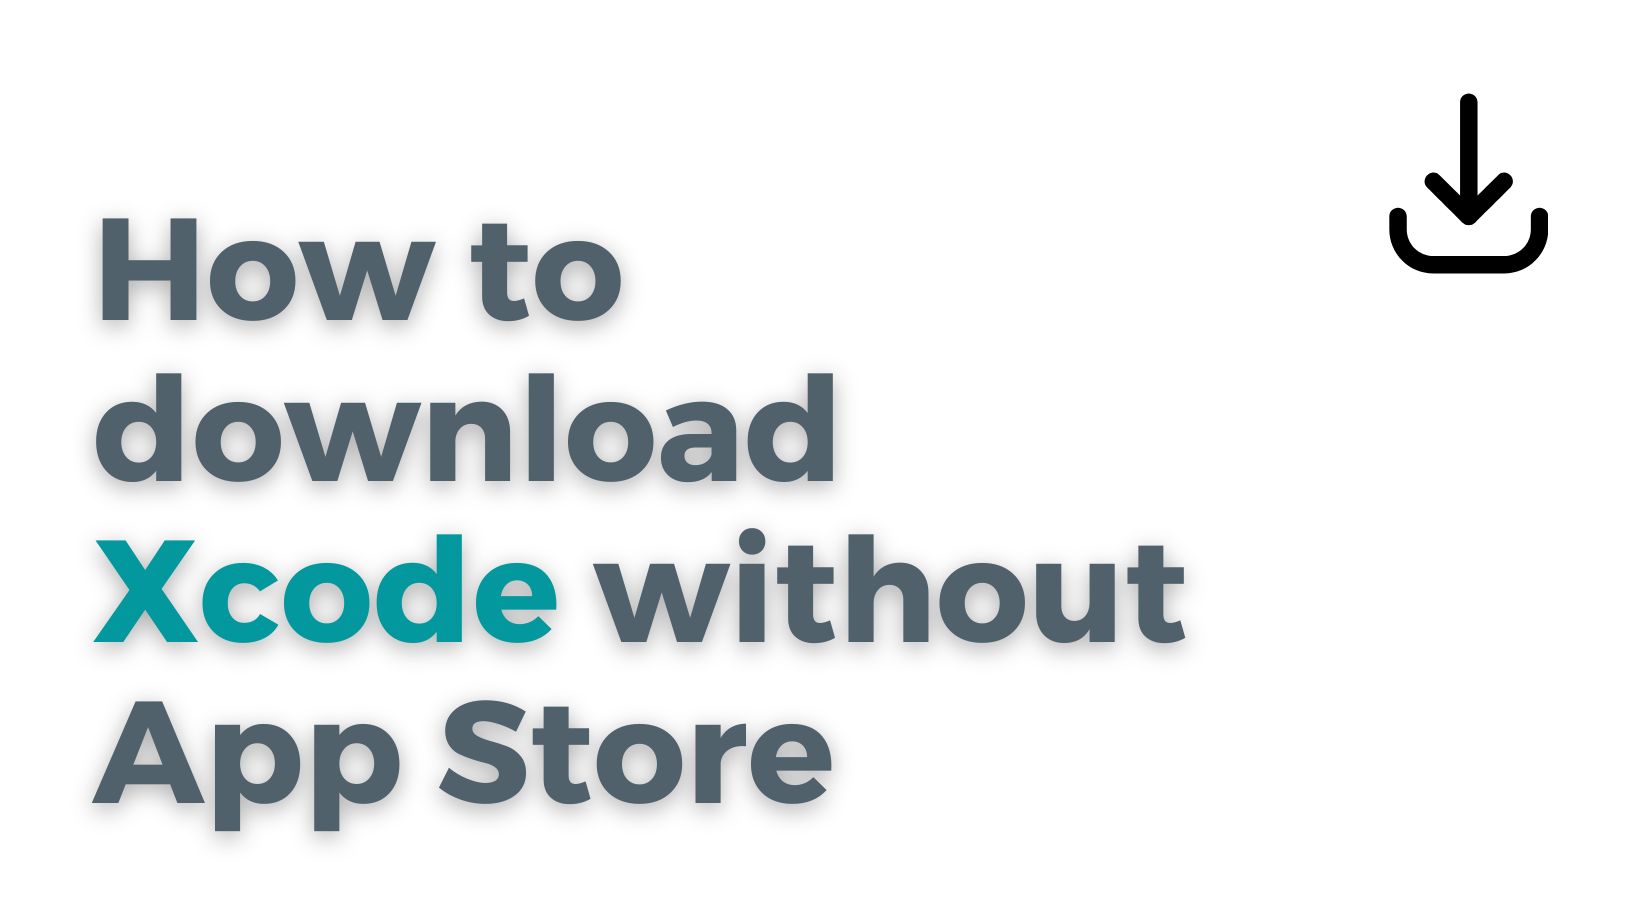 How to download Xcode without App Store